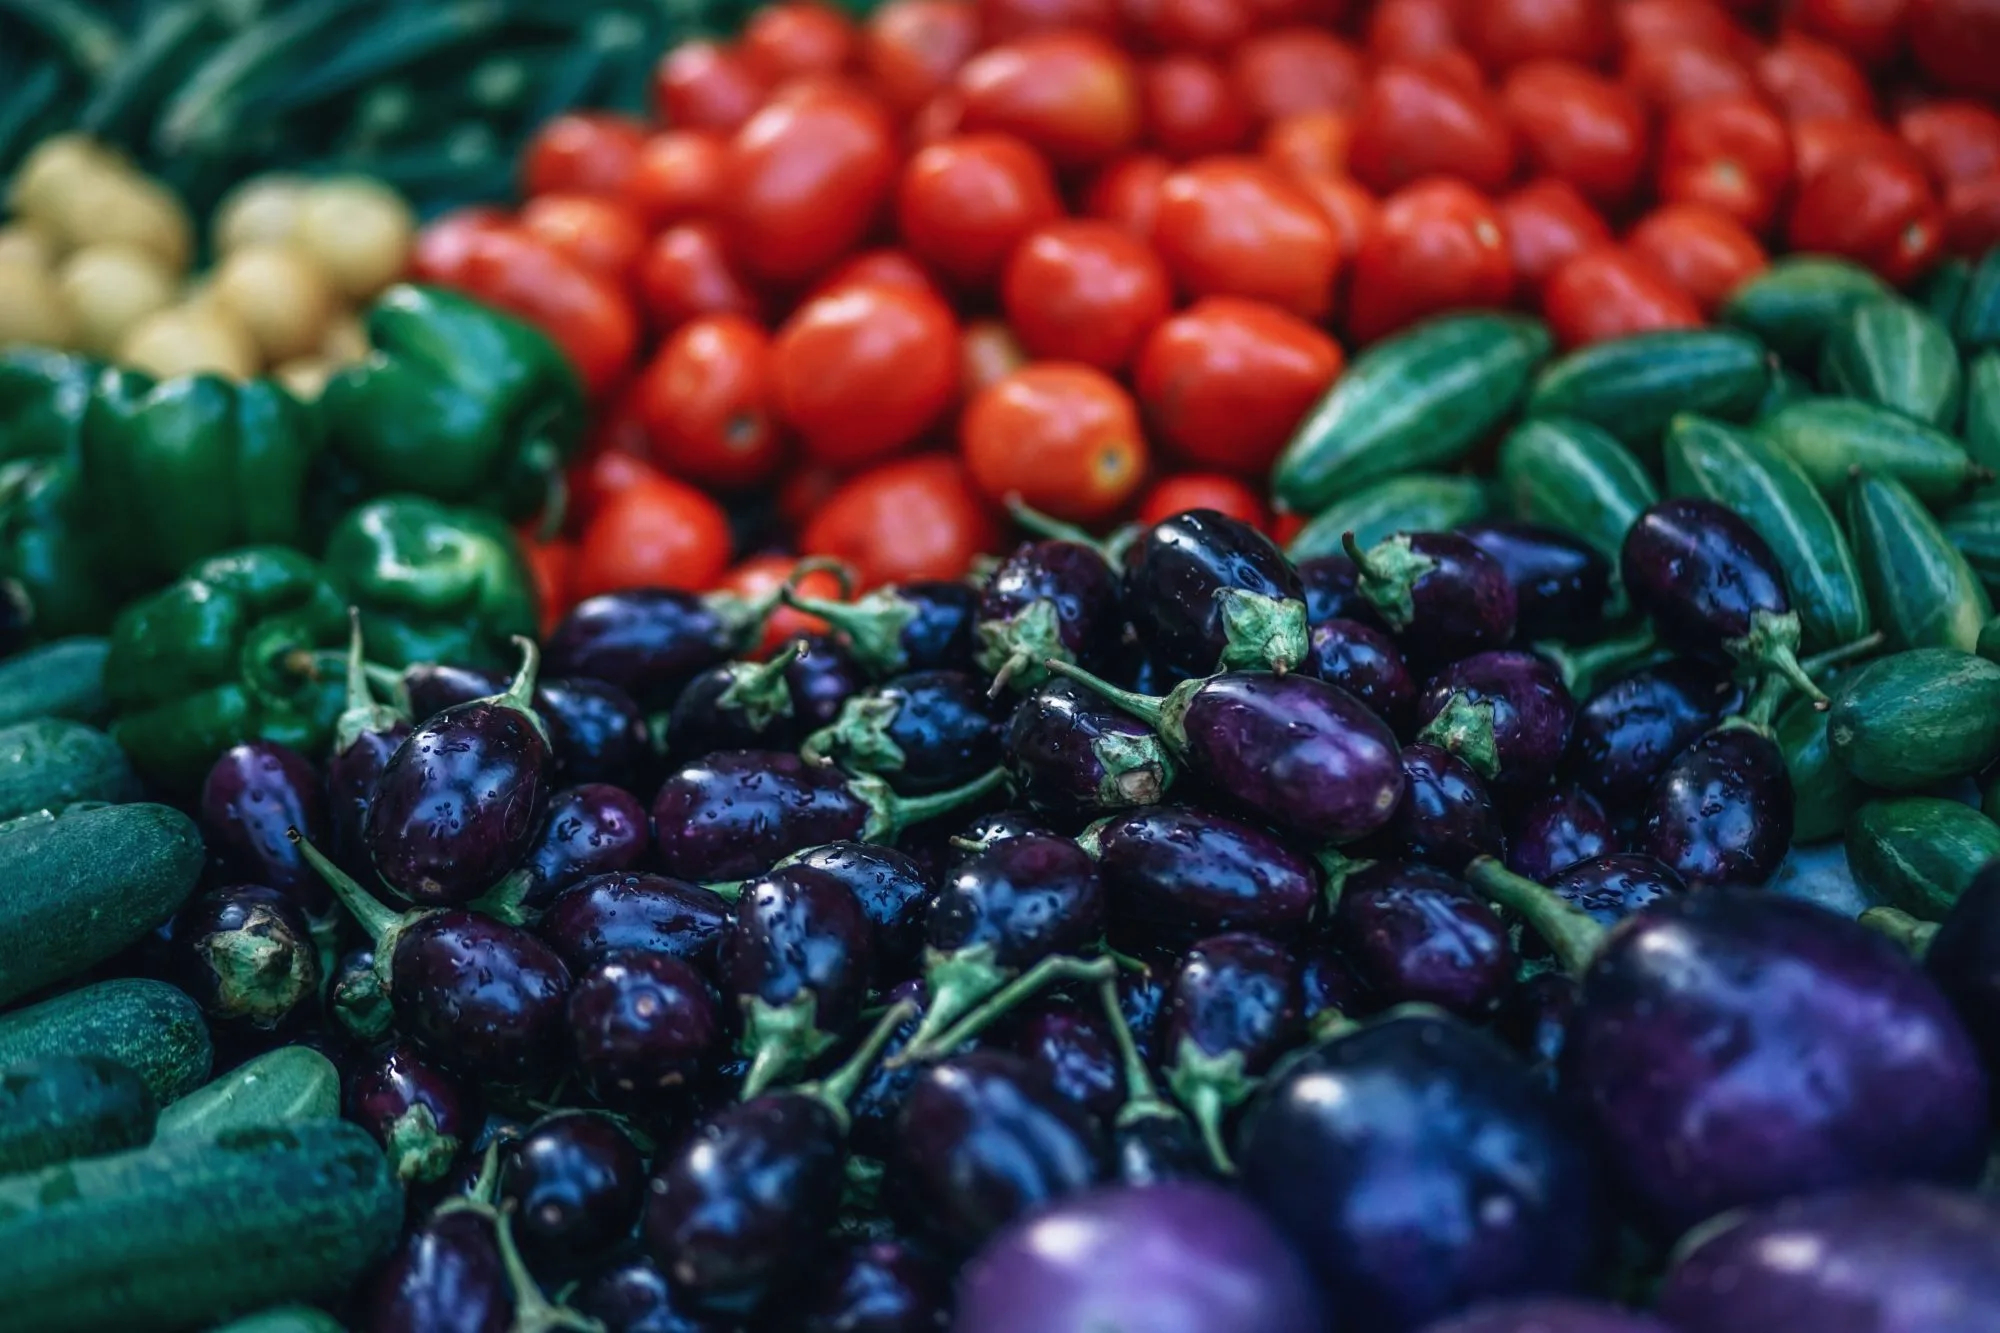 Nightshade Veggies Are Not Out To Harm Your Health